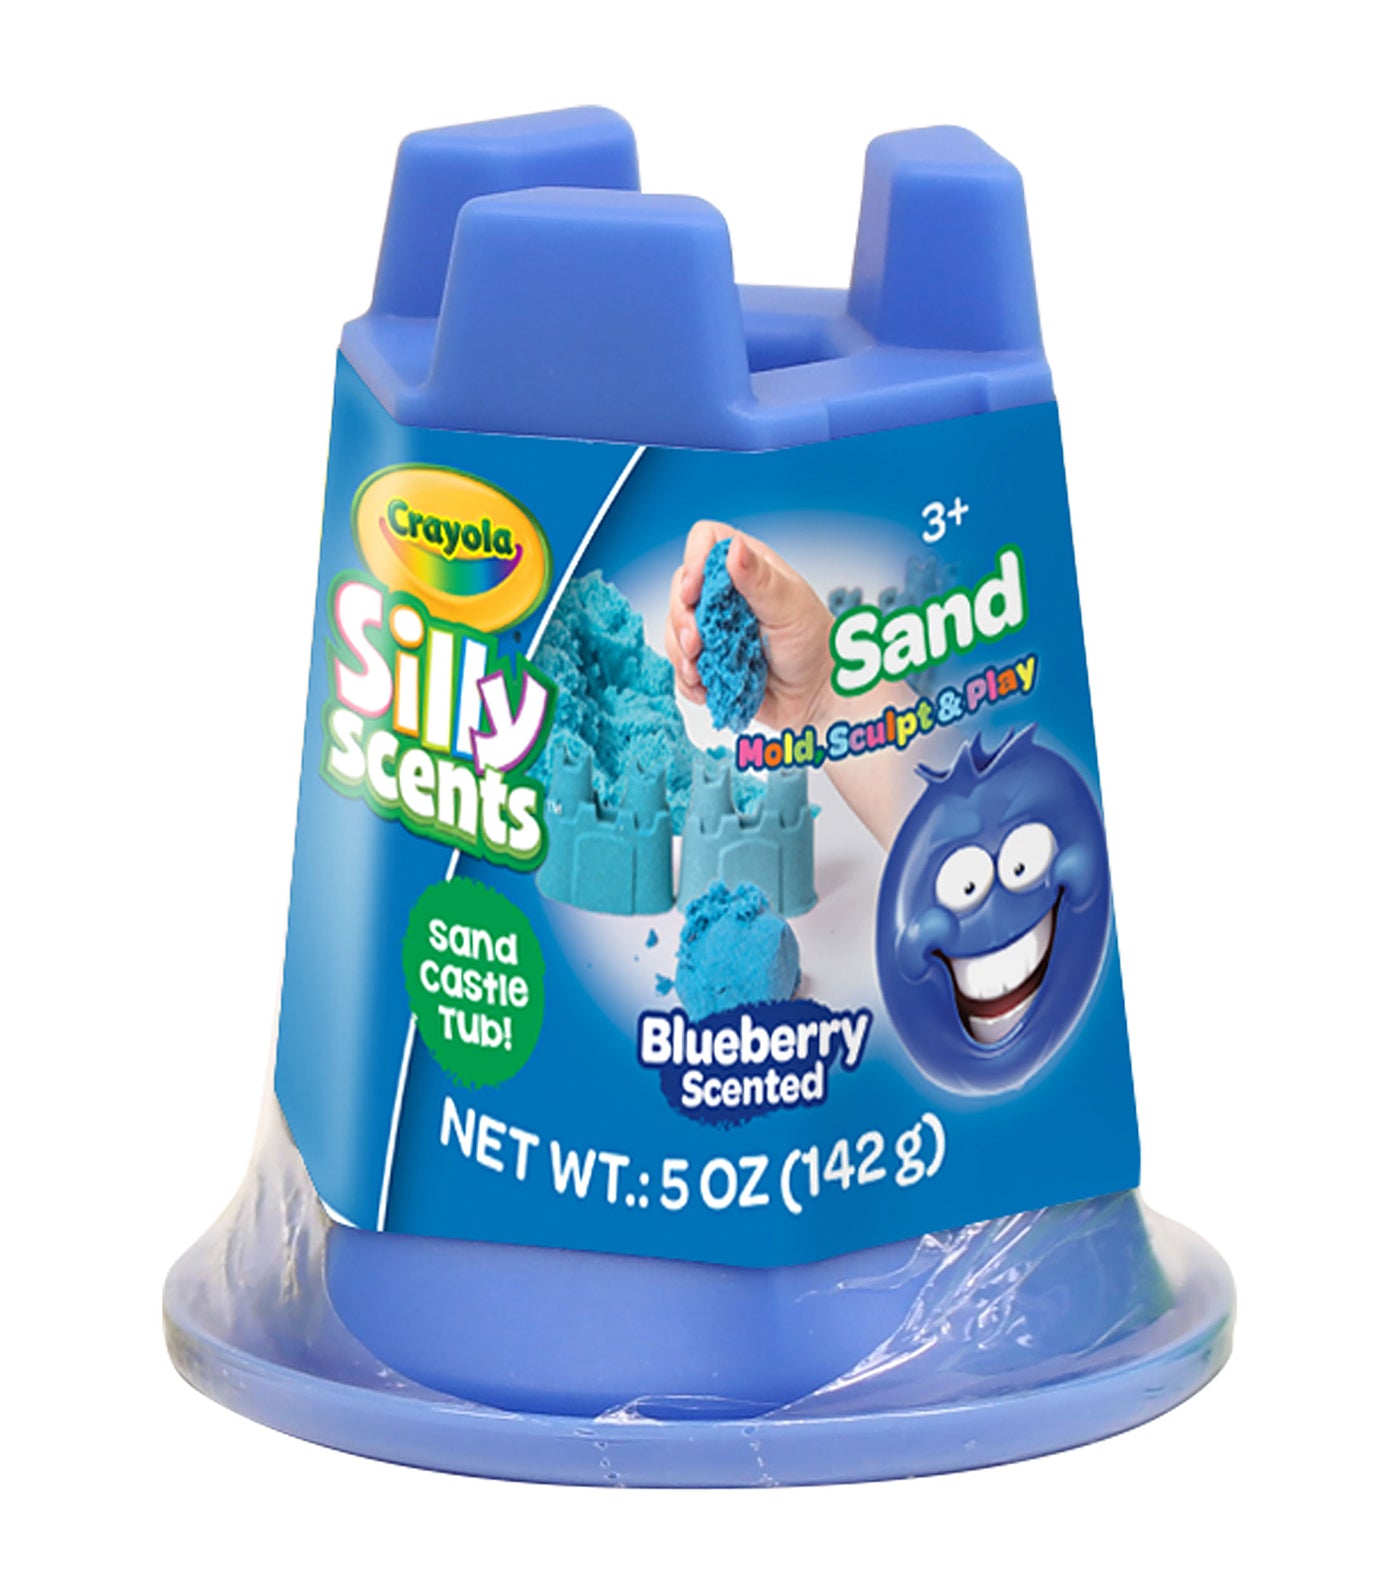 Silly Scents Sand Castle Tub Blueberry